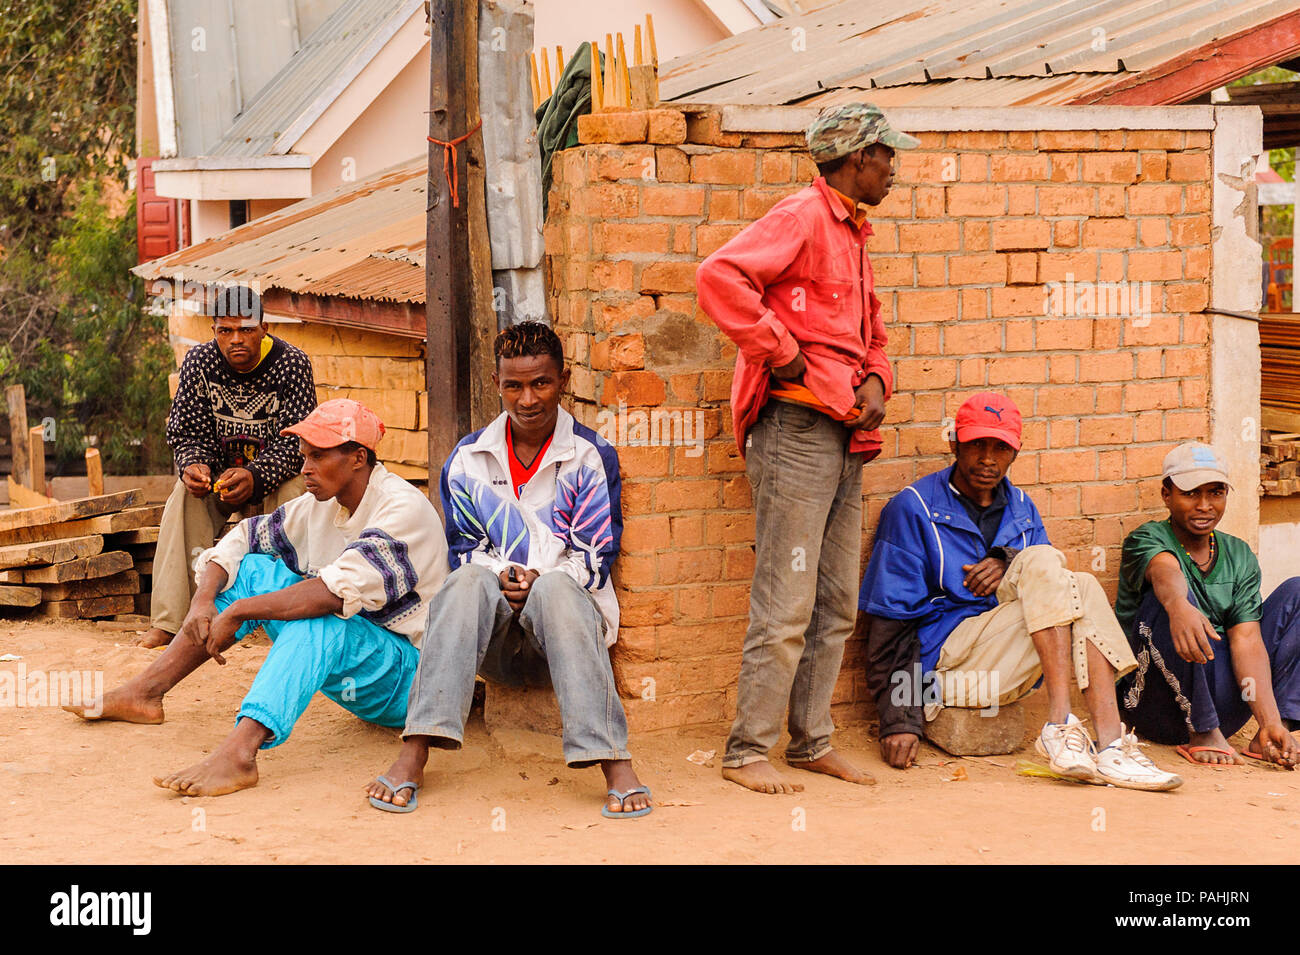 ANTANANARIVO, MADAGASCAR - JUNE 29, 2011: Unidentified Madagascar people sit in the street. People in Madagascar suffer of poverty due to the slow dev Stock Photo